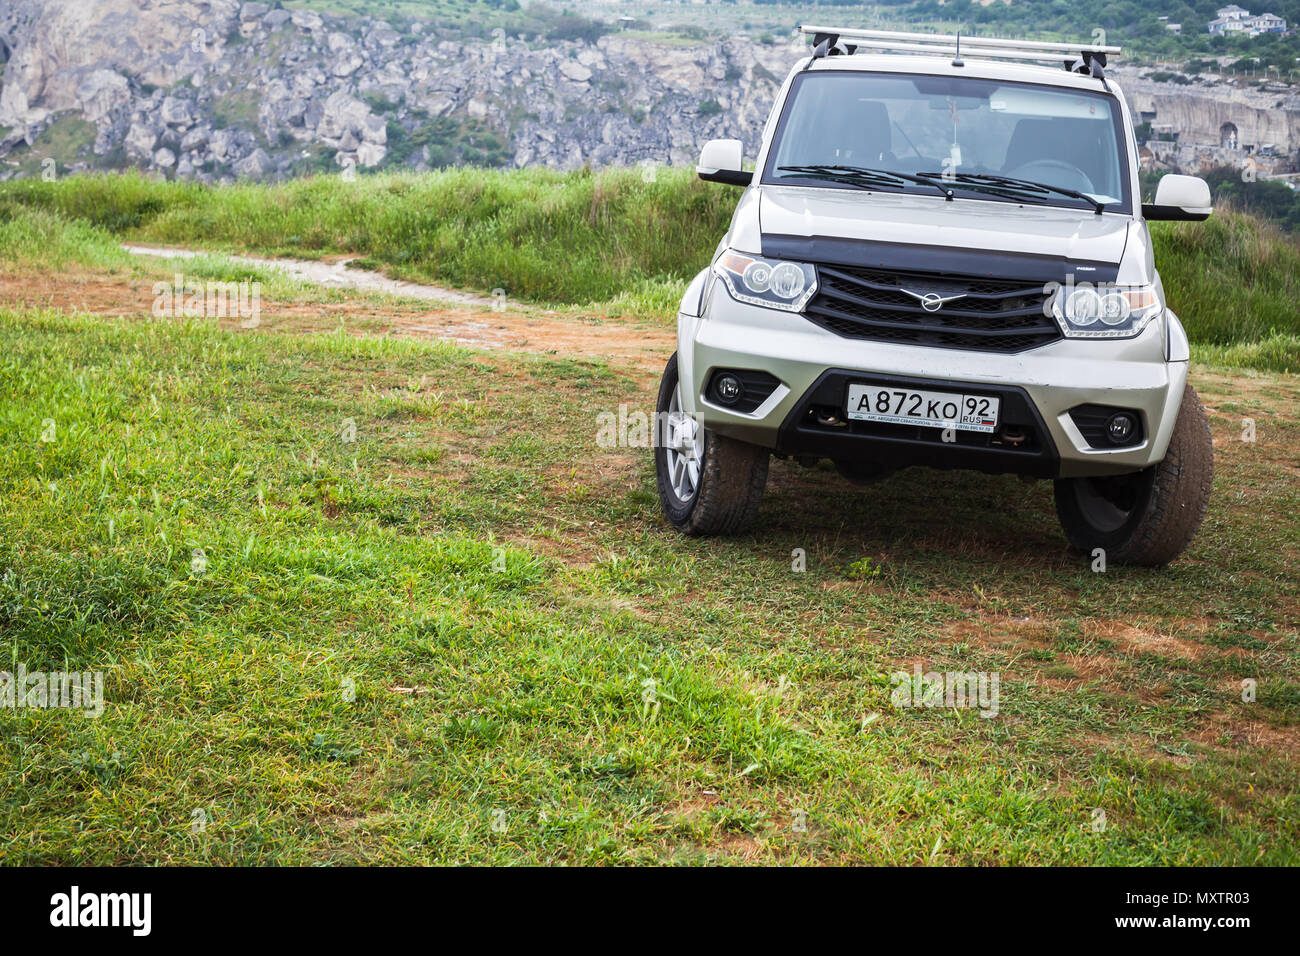 Sevastopol, Crimea - May 7, 2018: UAZ Patriot stands on grass in mountains. UAZ-3163, mid-size SUV produced by UAZ division of SeverstalAvto in Ulyano Stock Photo